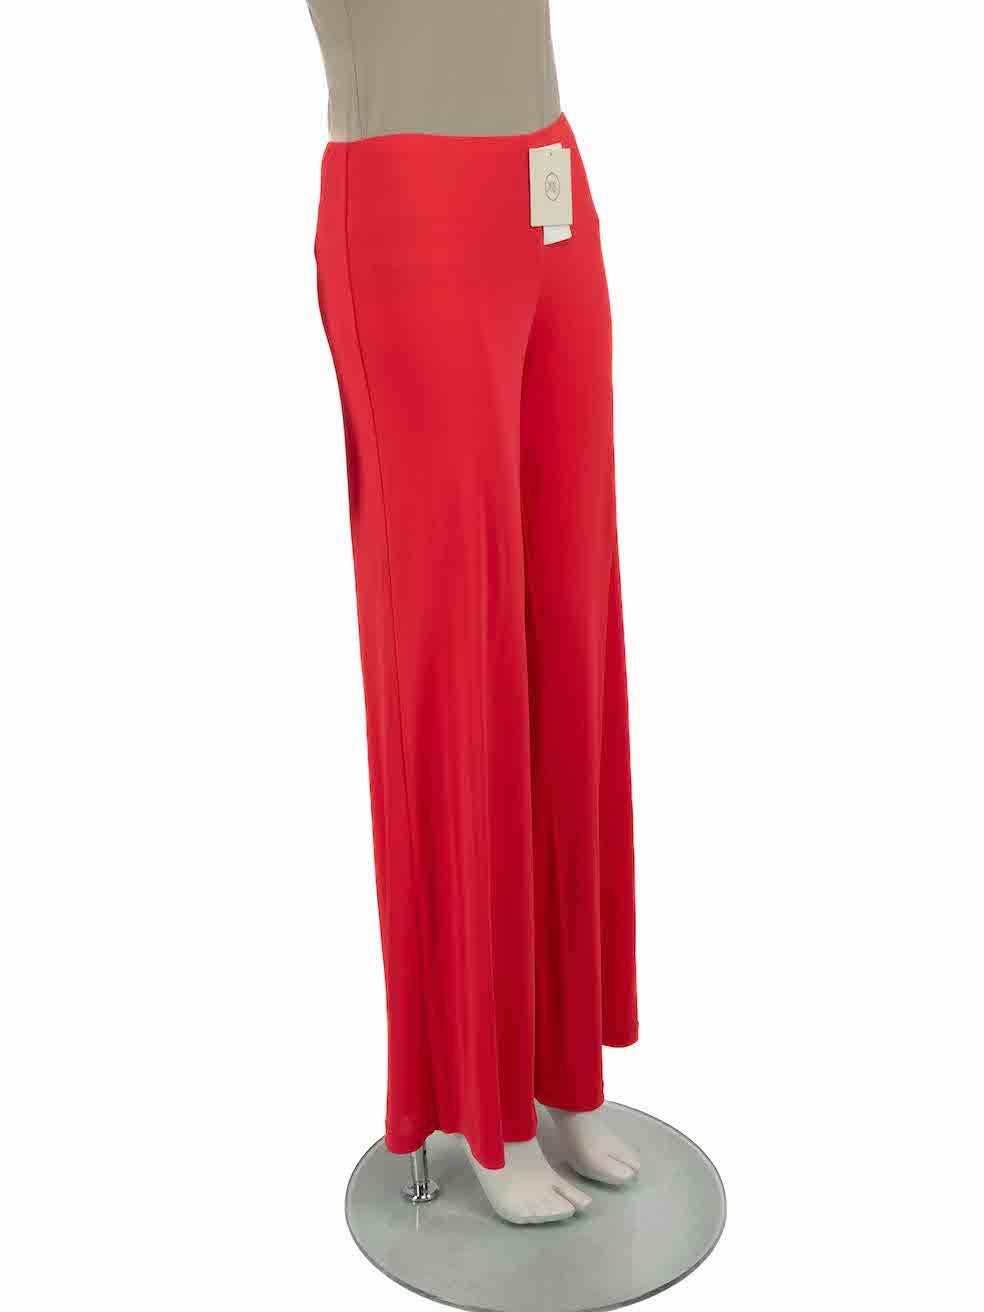 CONDITION is Never worn, with tags. No visible wear to trousers is evident on this new La Perla designer resale item.
 
 
 
 Details
 
 
 Coral red
 
 Synthetic
 
 Trousers
 
 Elasticated waistband
 
 Side leg
 
 
 
 
 
 Made in Italy
 
 
 
